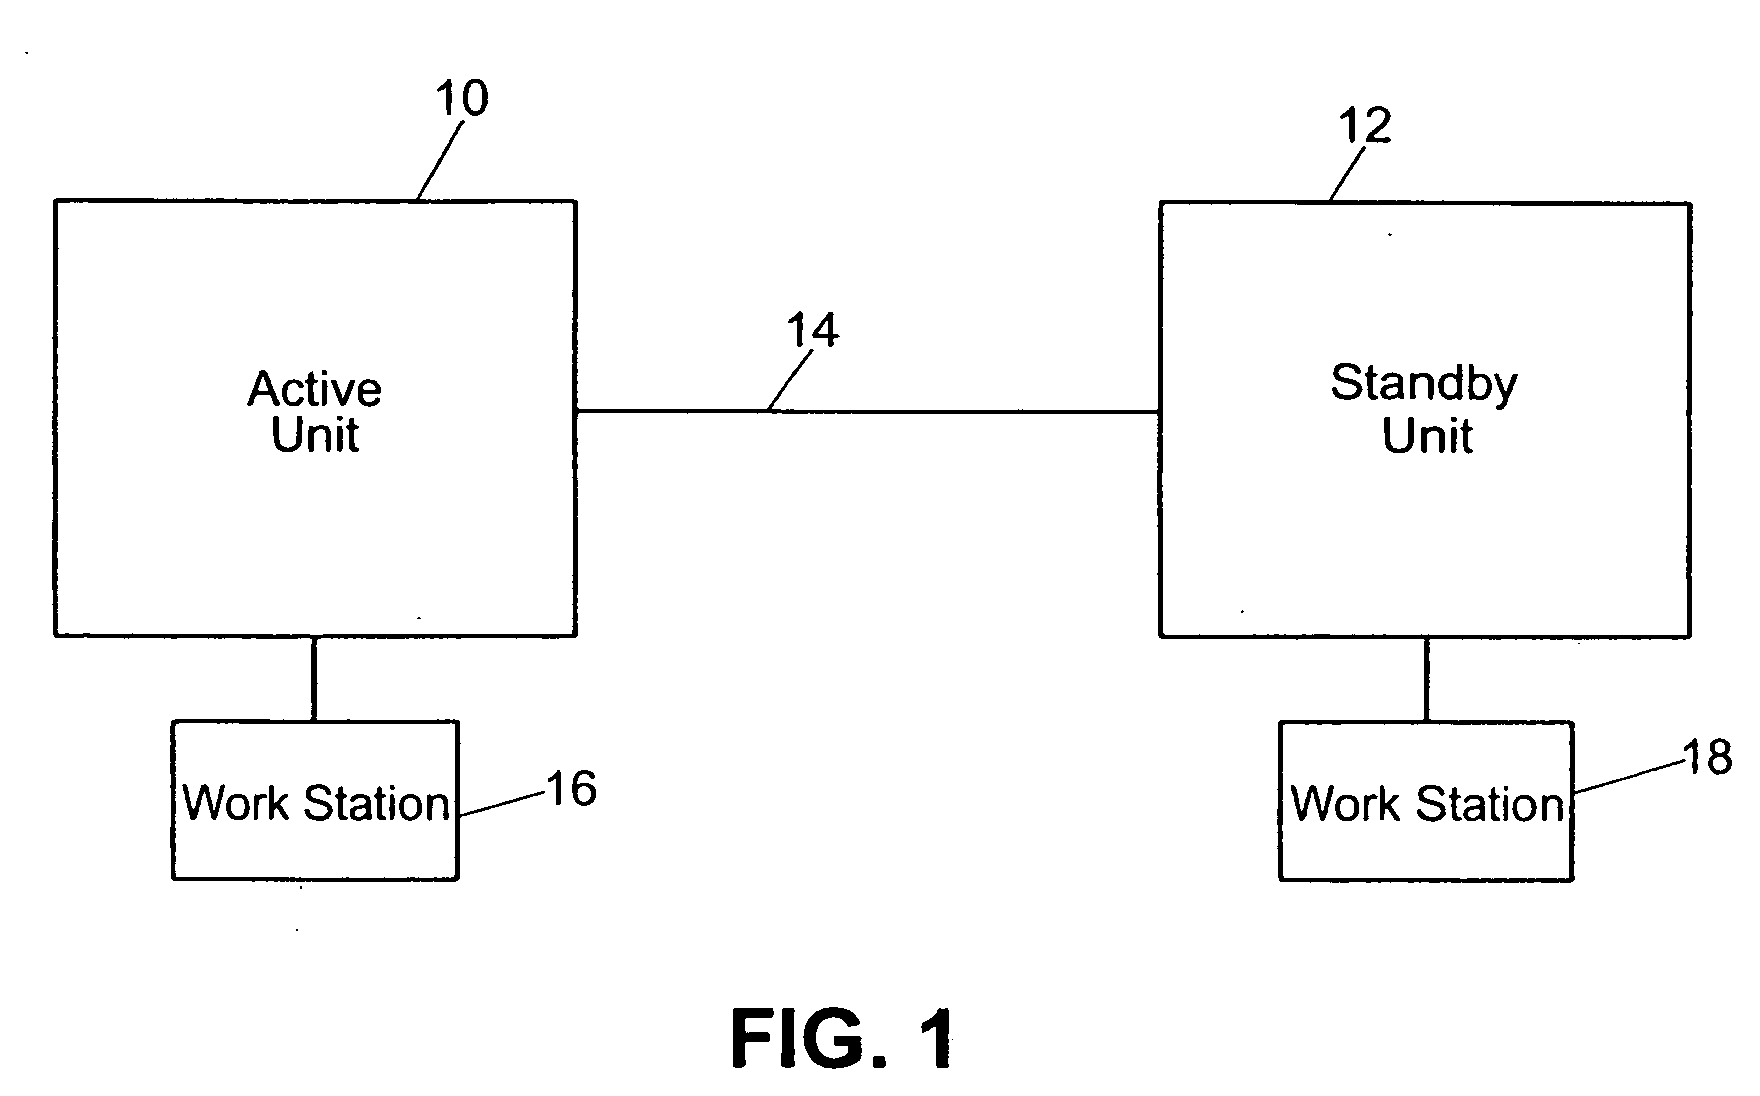 Method of debugging "active" unit using "non-intrusive source-level debugger" on "standby" unit of high availability system